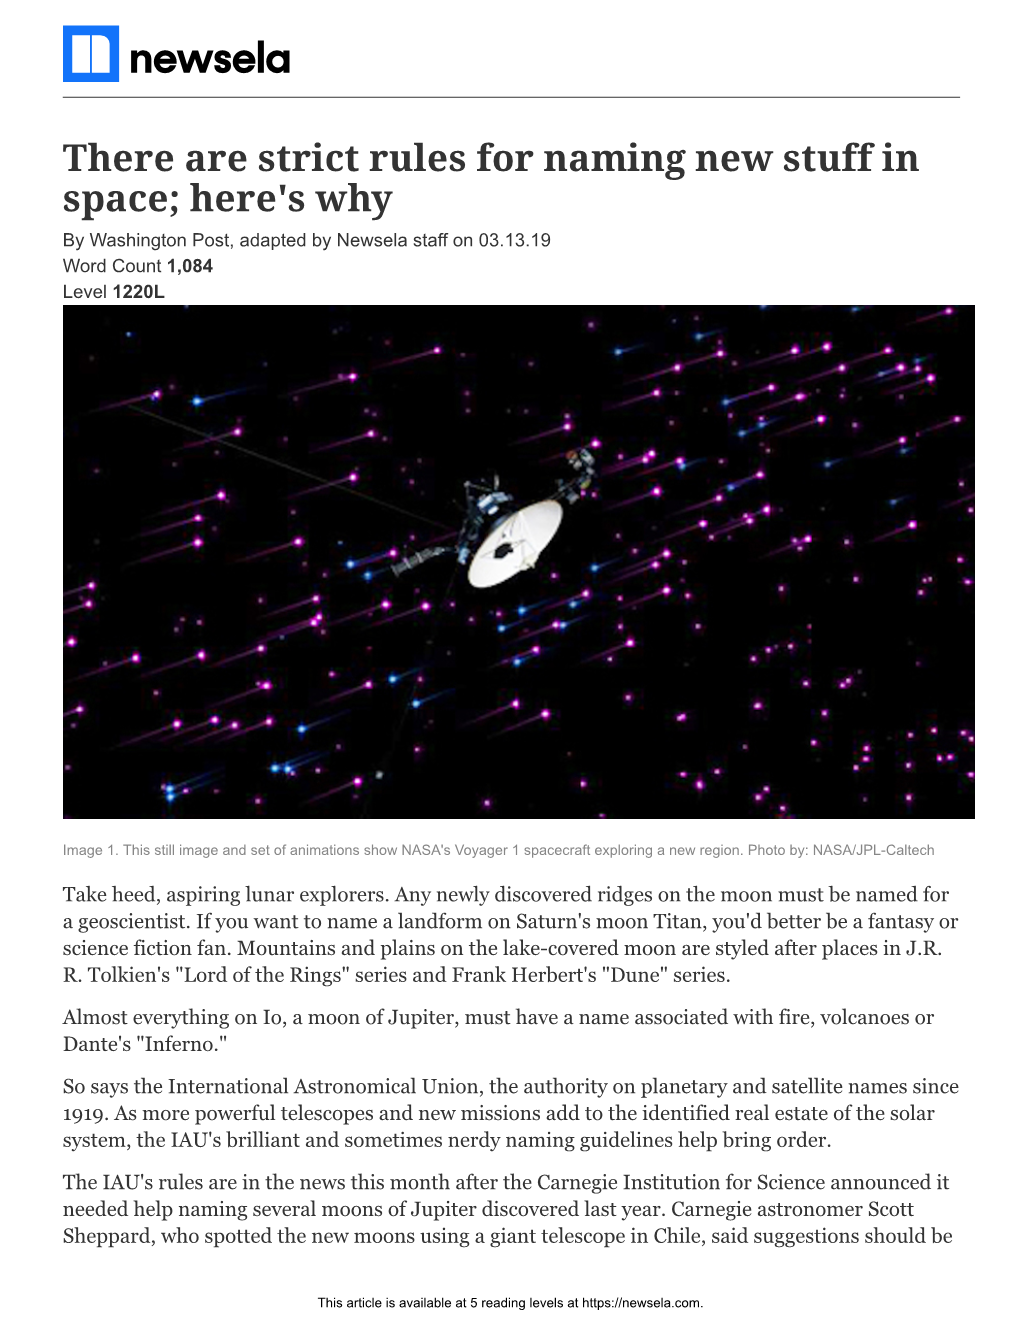 There Are Strict Rules for Naming New Stuff in Space; Here's Why by Washington Post, Adapted by Newsela Staff on 03.13.19 Word Count 1,084 Level 1220L